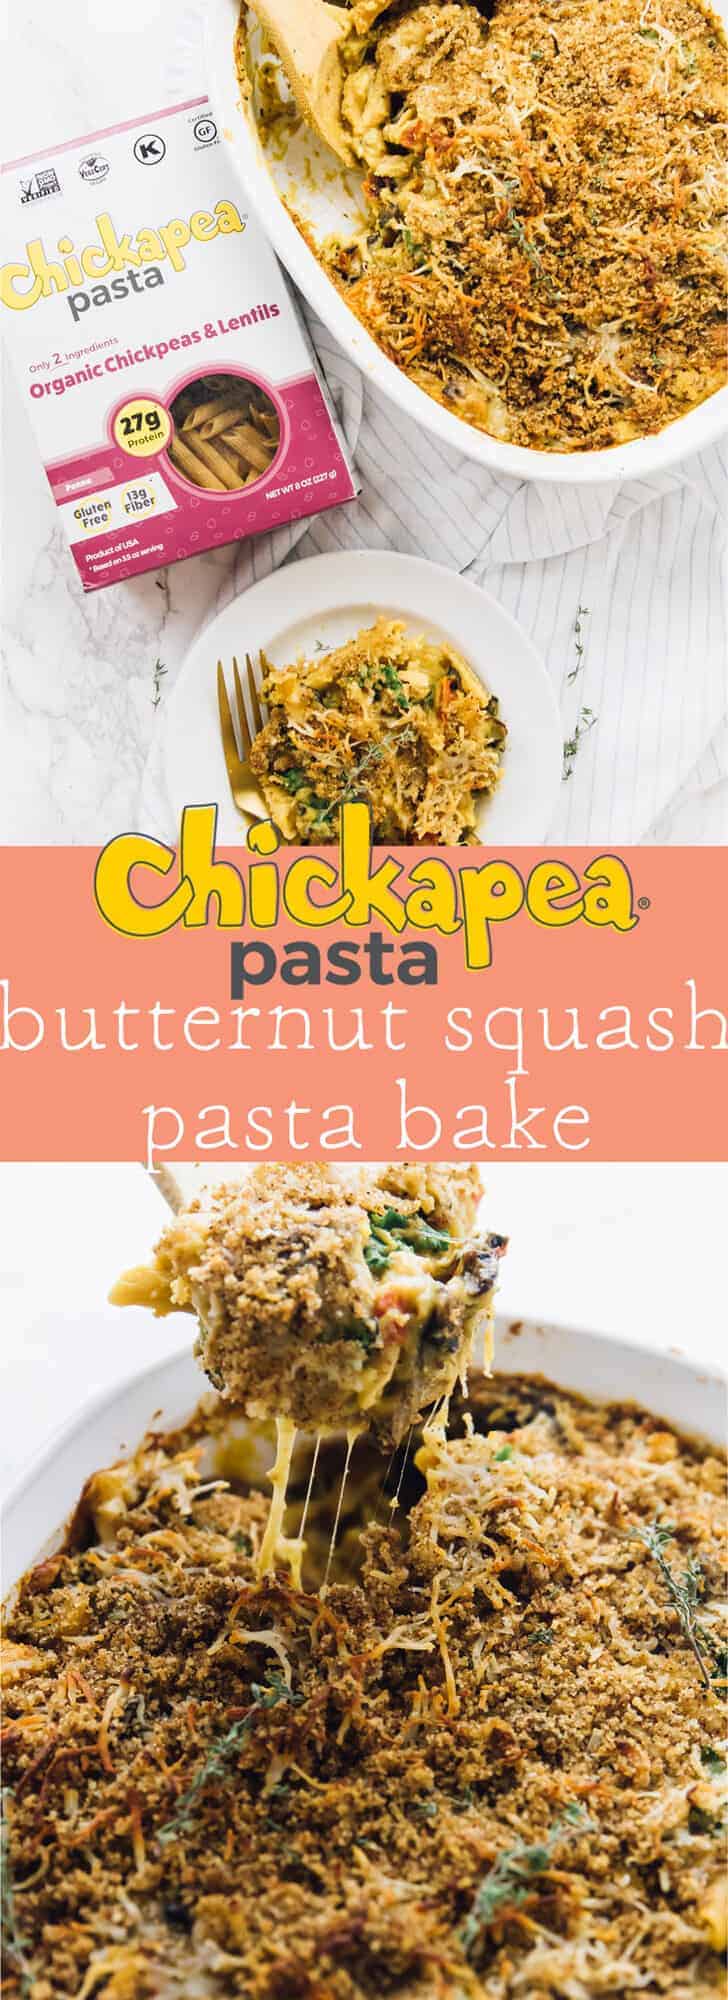 This Butternut Squash Pasta Bake is a great weeknight meal dinner! It's loaded with protein, has a divine butternut squash pasta sauce and tastes absolutely delicious! via https://jessicainthekitchen.com 